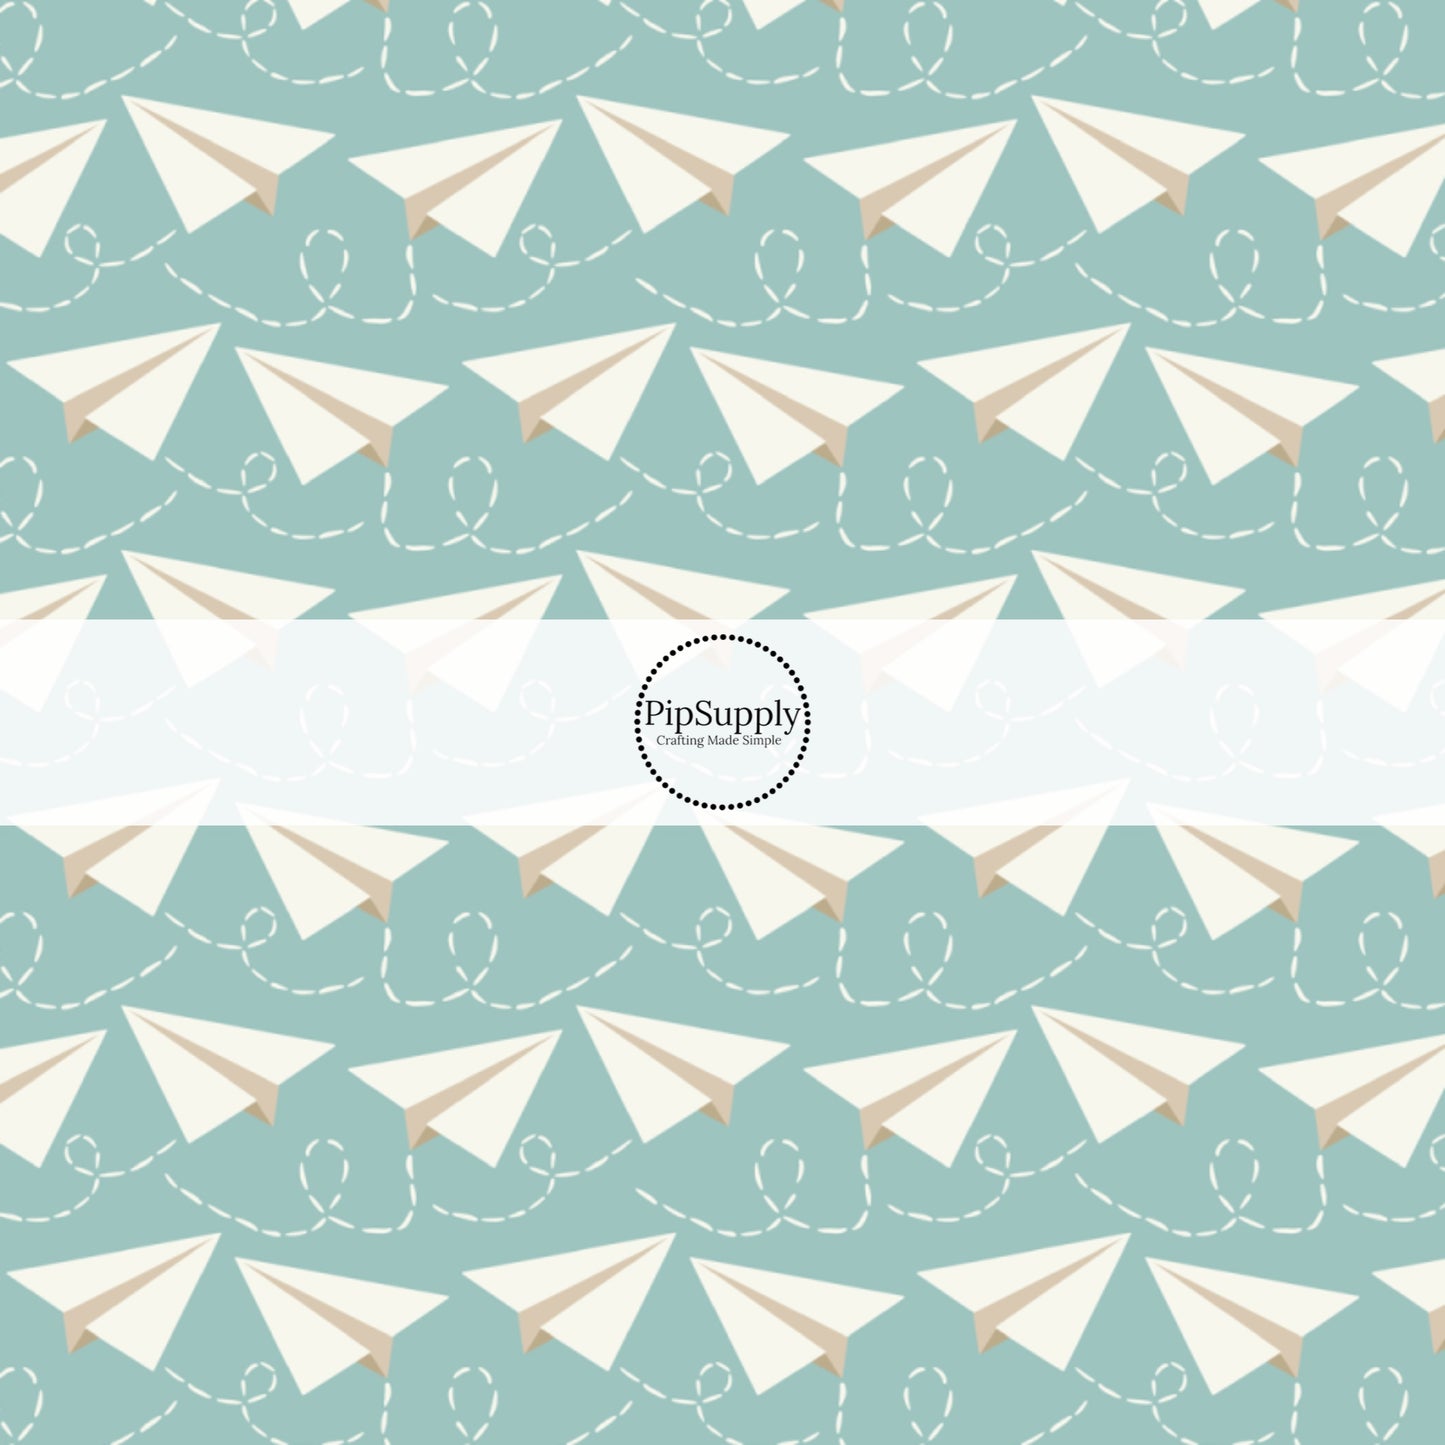 Light aqua fabric by the yard with white paper airplanes.